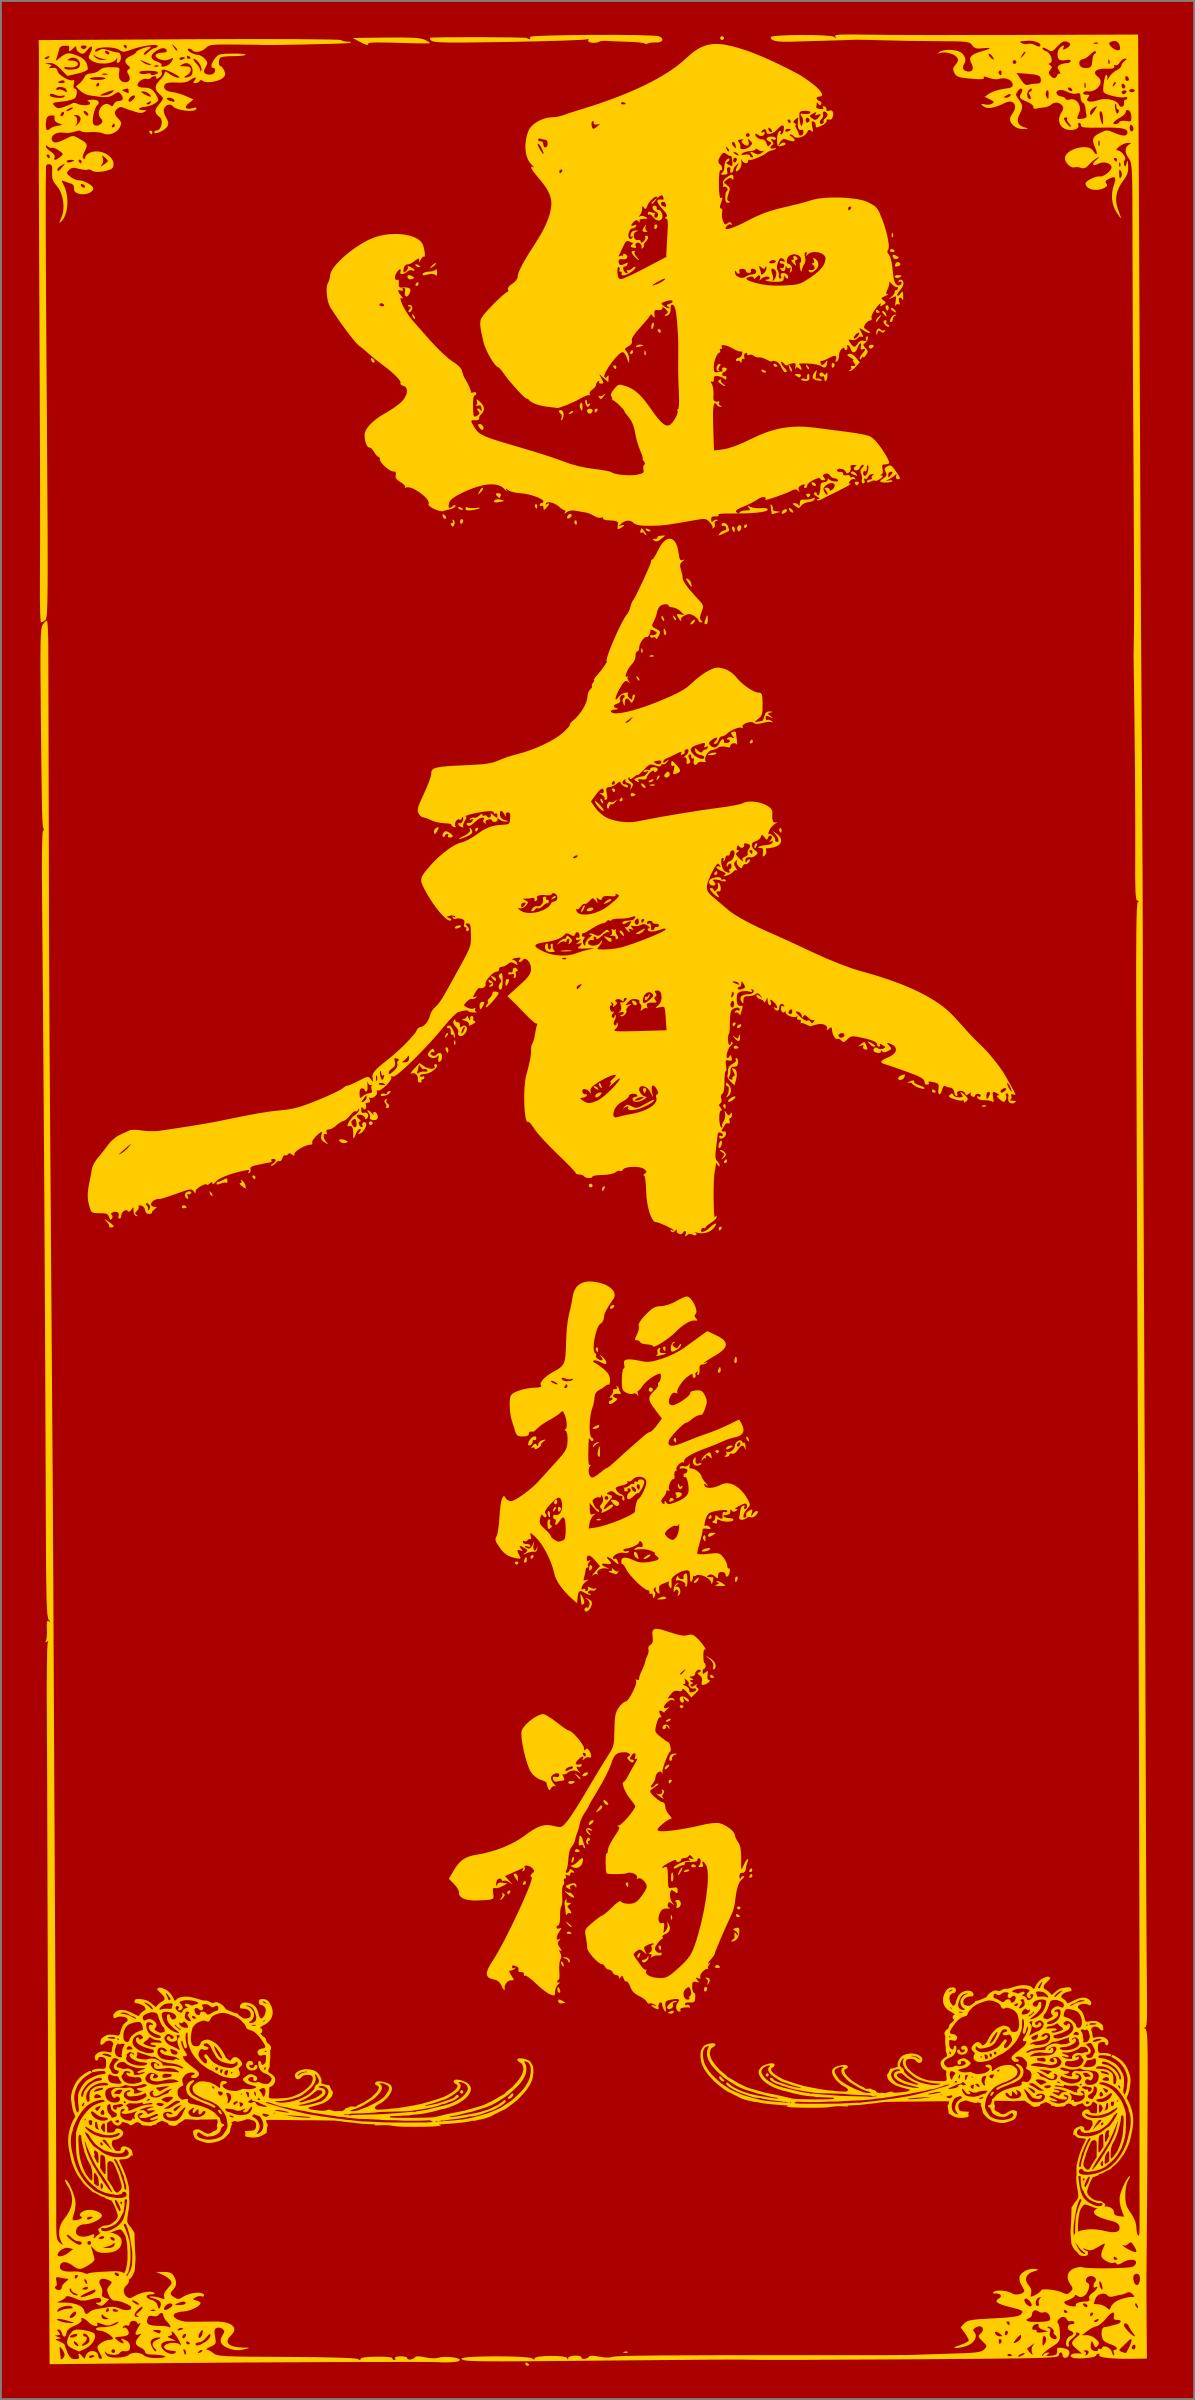 Chinesse New Year Red Envelope png